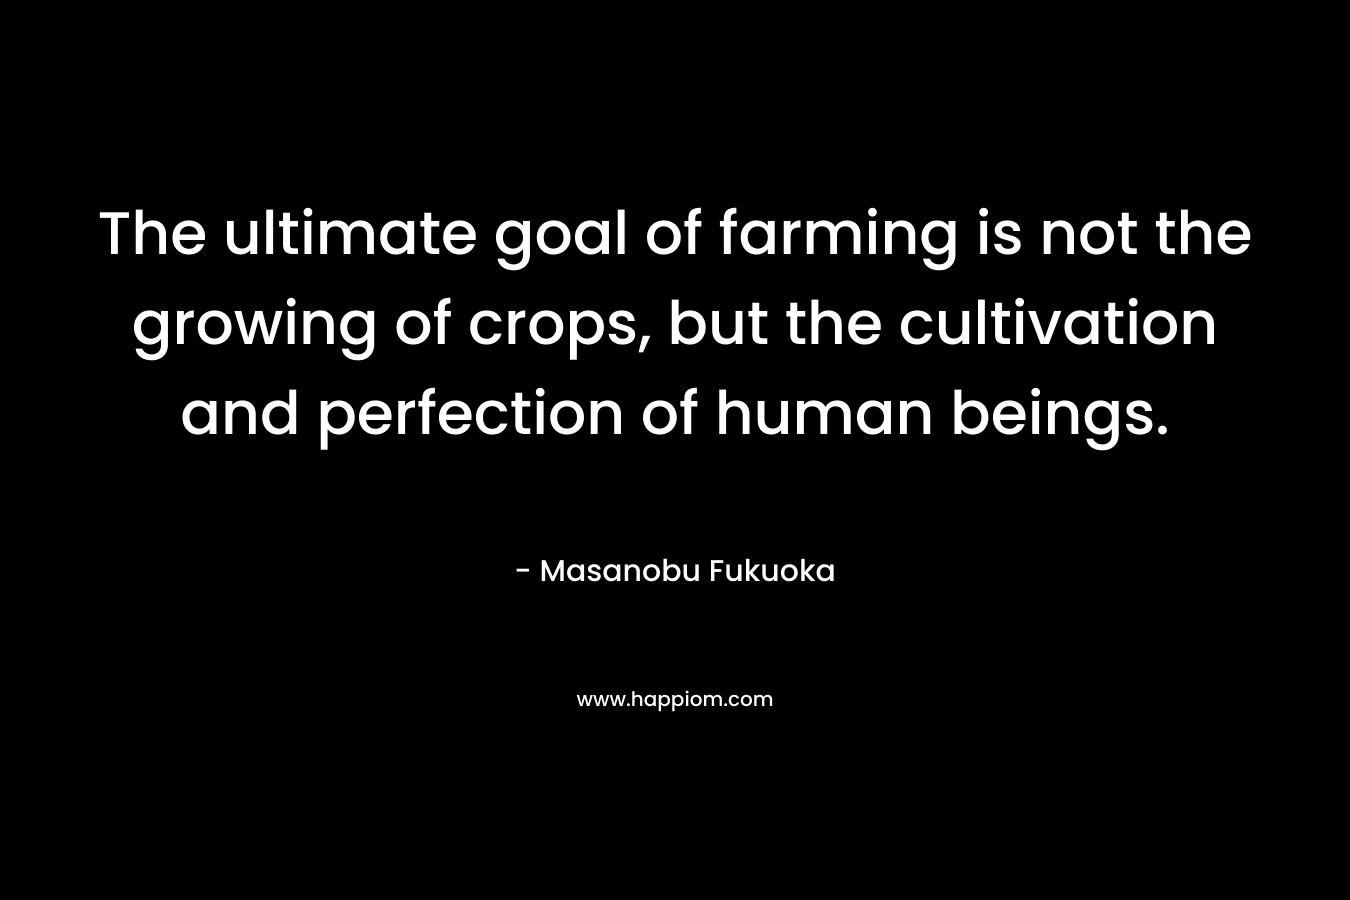 The ultimate goal of farming is not the growing of crops, but the cultivation and perfection of human beings. – Masanobu Fukuoka